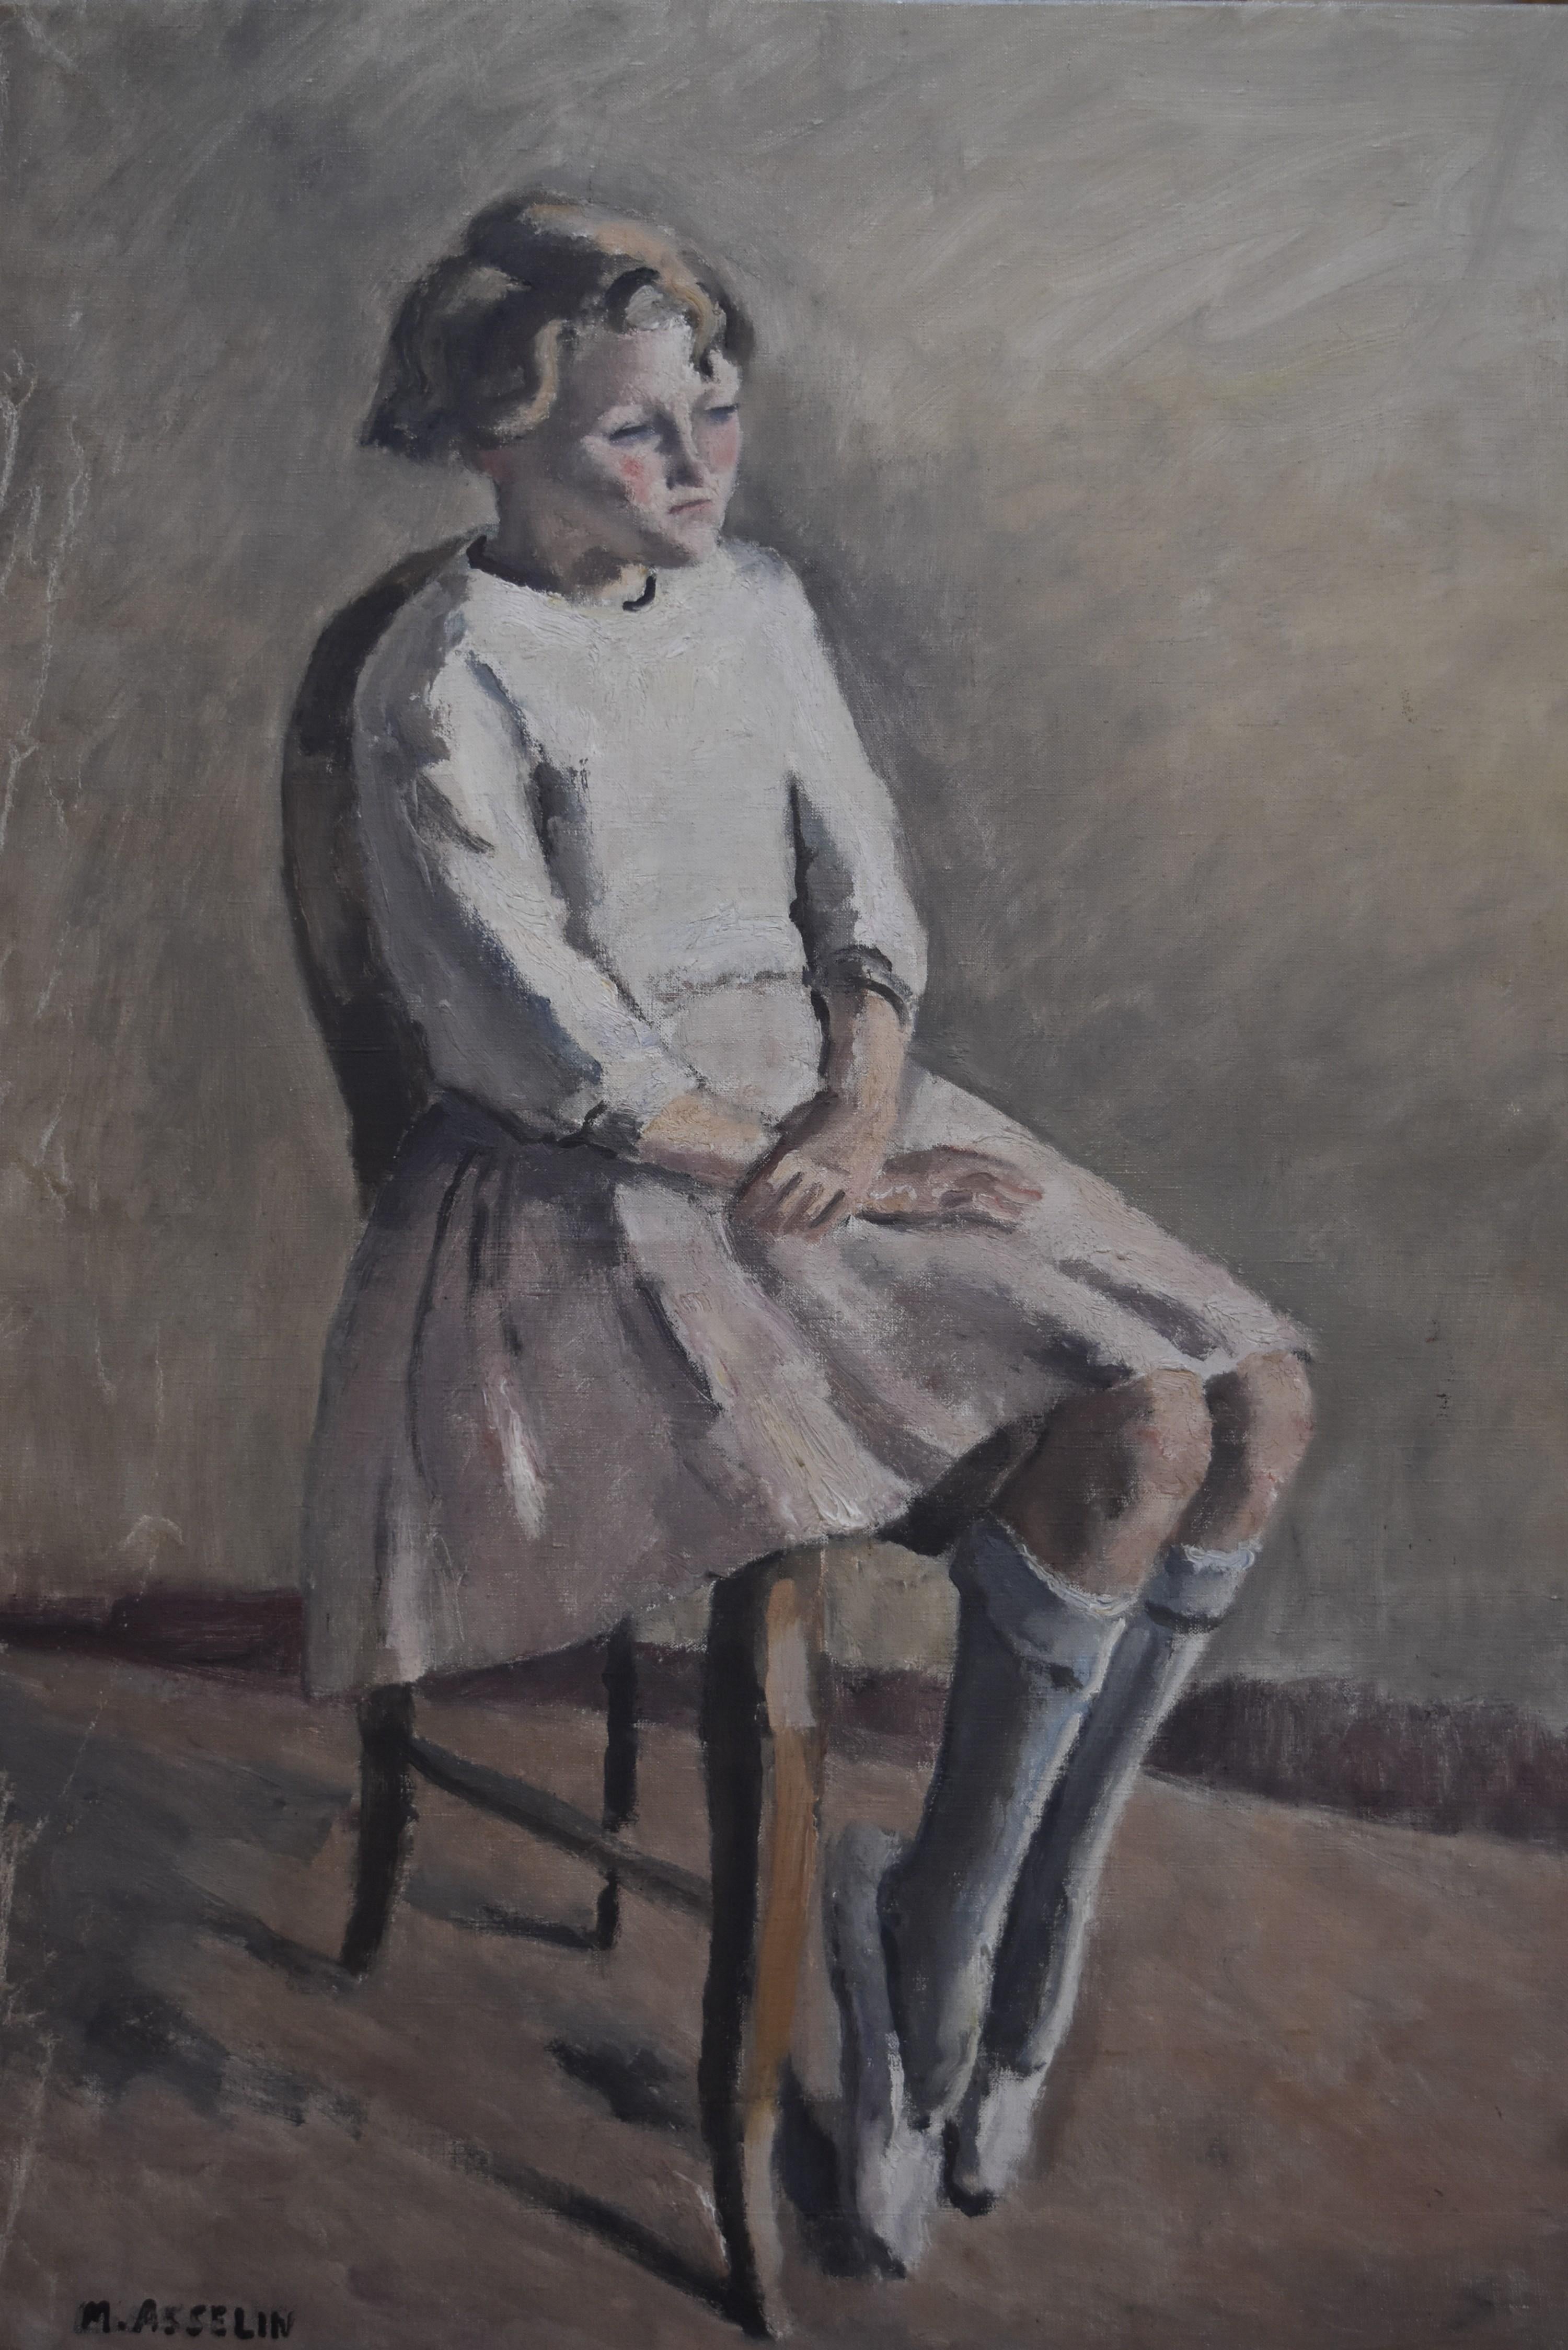 Maurice Asselin (1882-1947) 
A young girl in white
Signed lower right
Oil on canvas.
70 x 50 cm
In quite good condition, rubbings along the left border (see photographs please)
No frame

Maurice Asselin is a painter and engraver, member of the